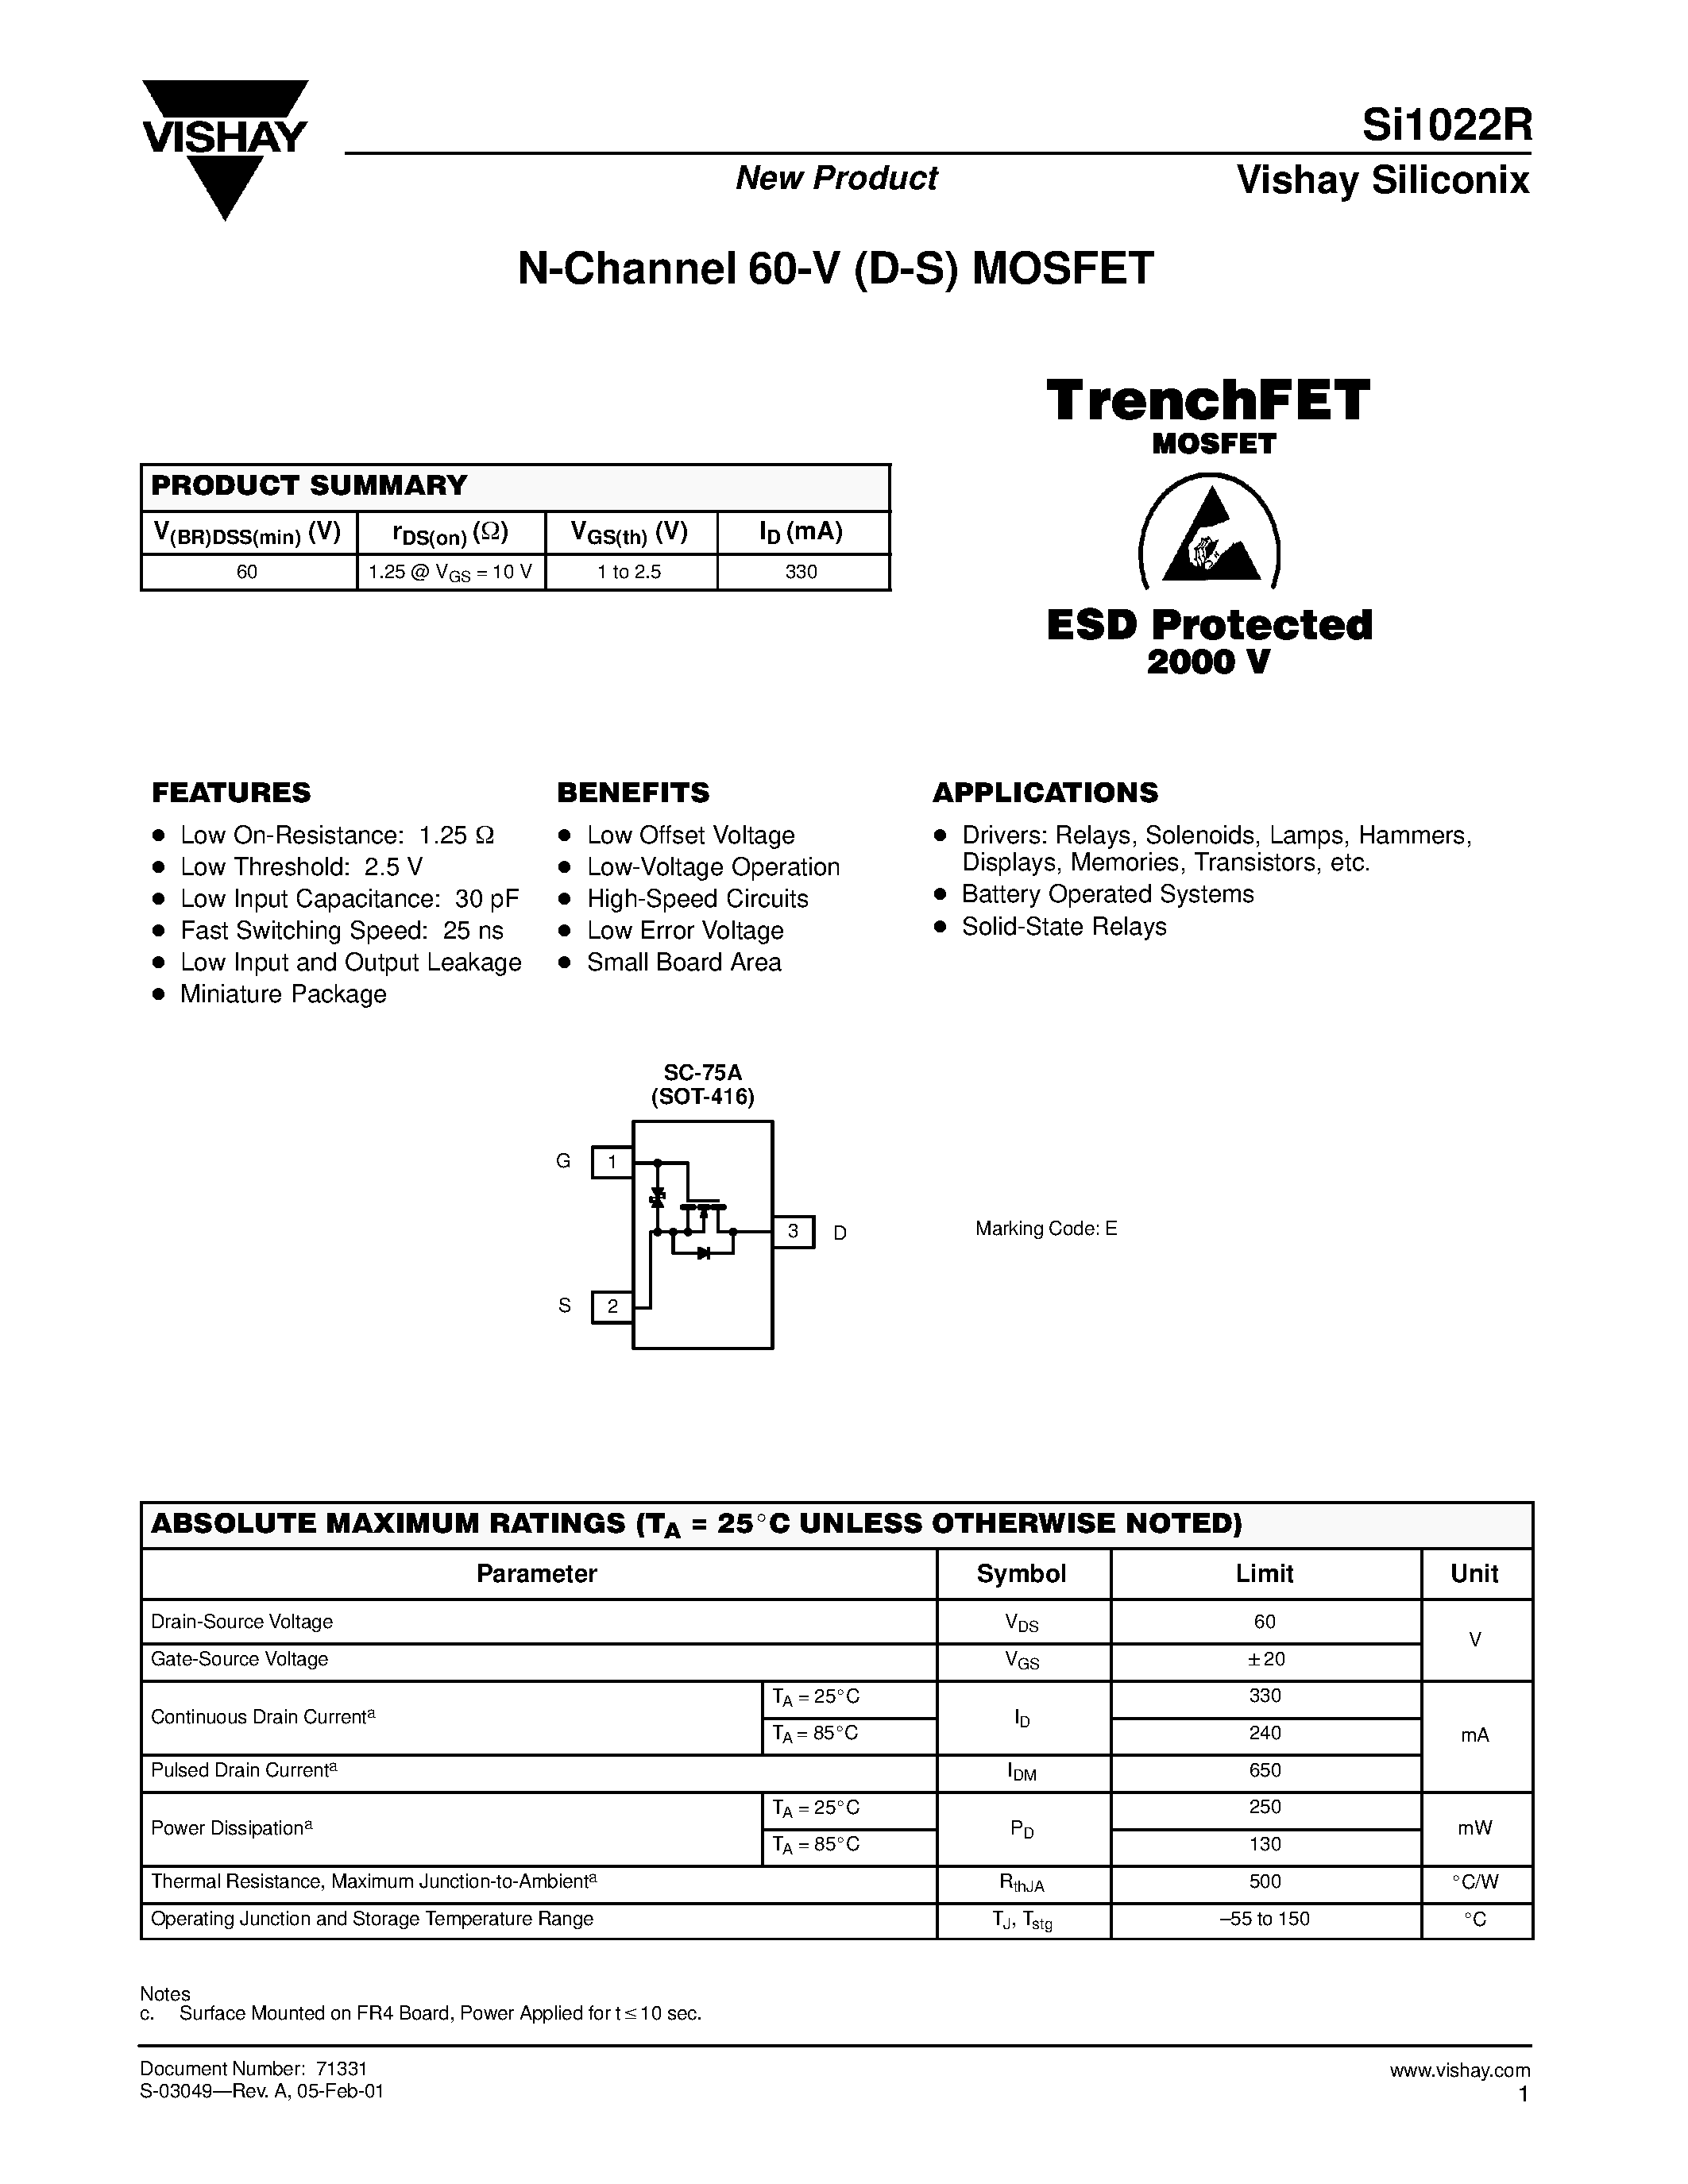 Даташит SI1022R - N-Channel 60-V (D-S) MOSFET страница 1